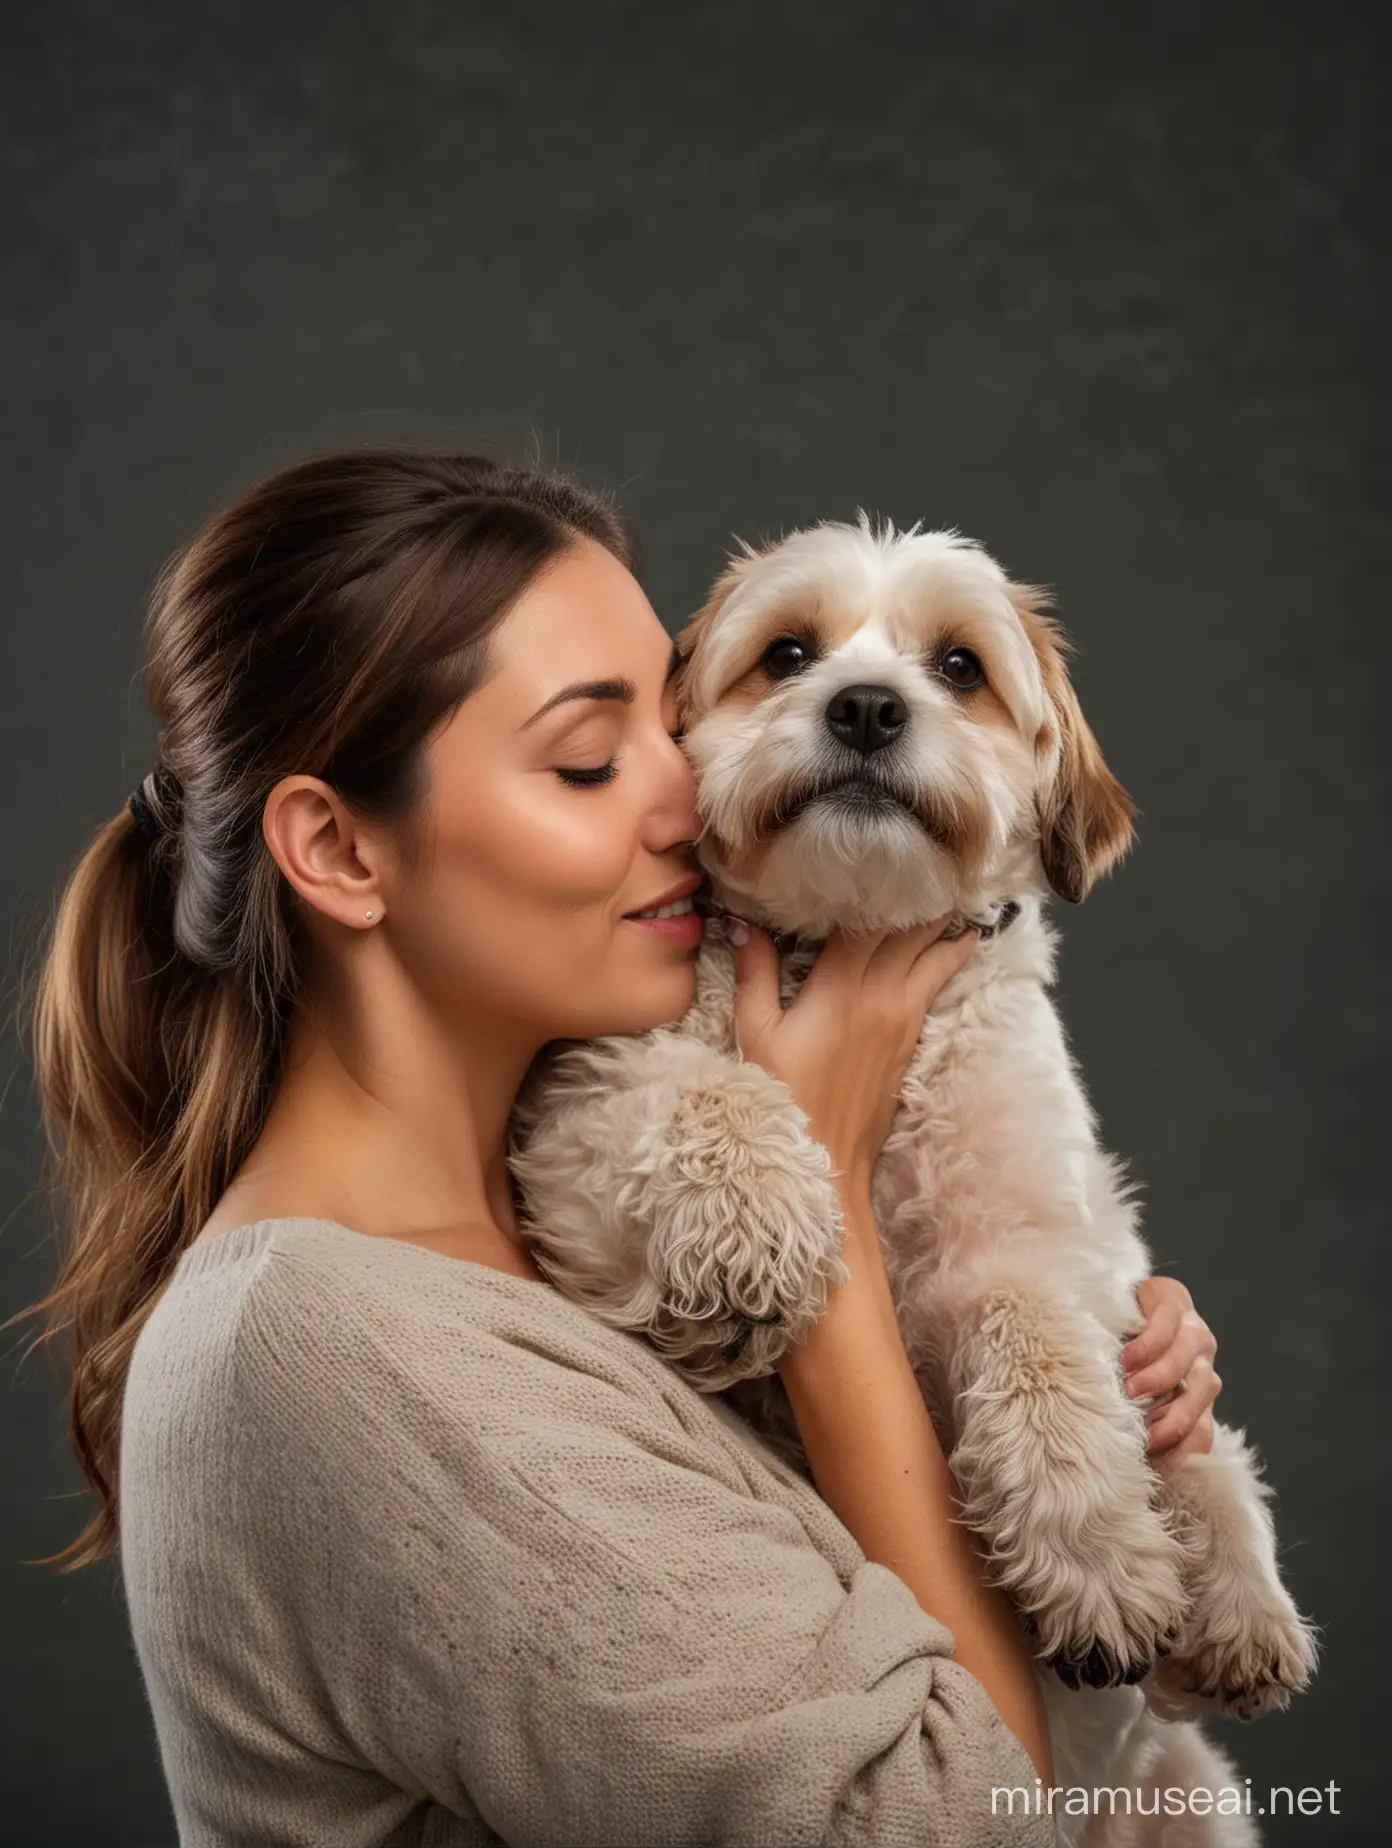 Woman Kissing Her Dog While Embracing Him Against Dark Studio Backdrop